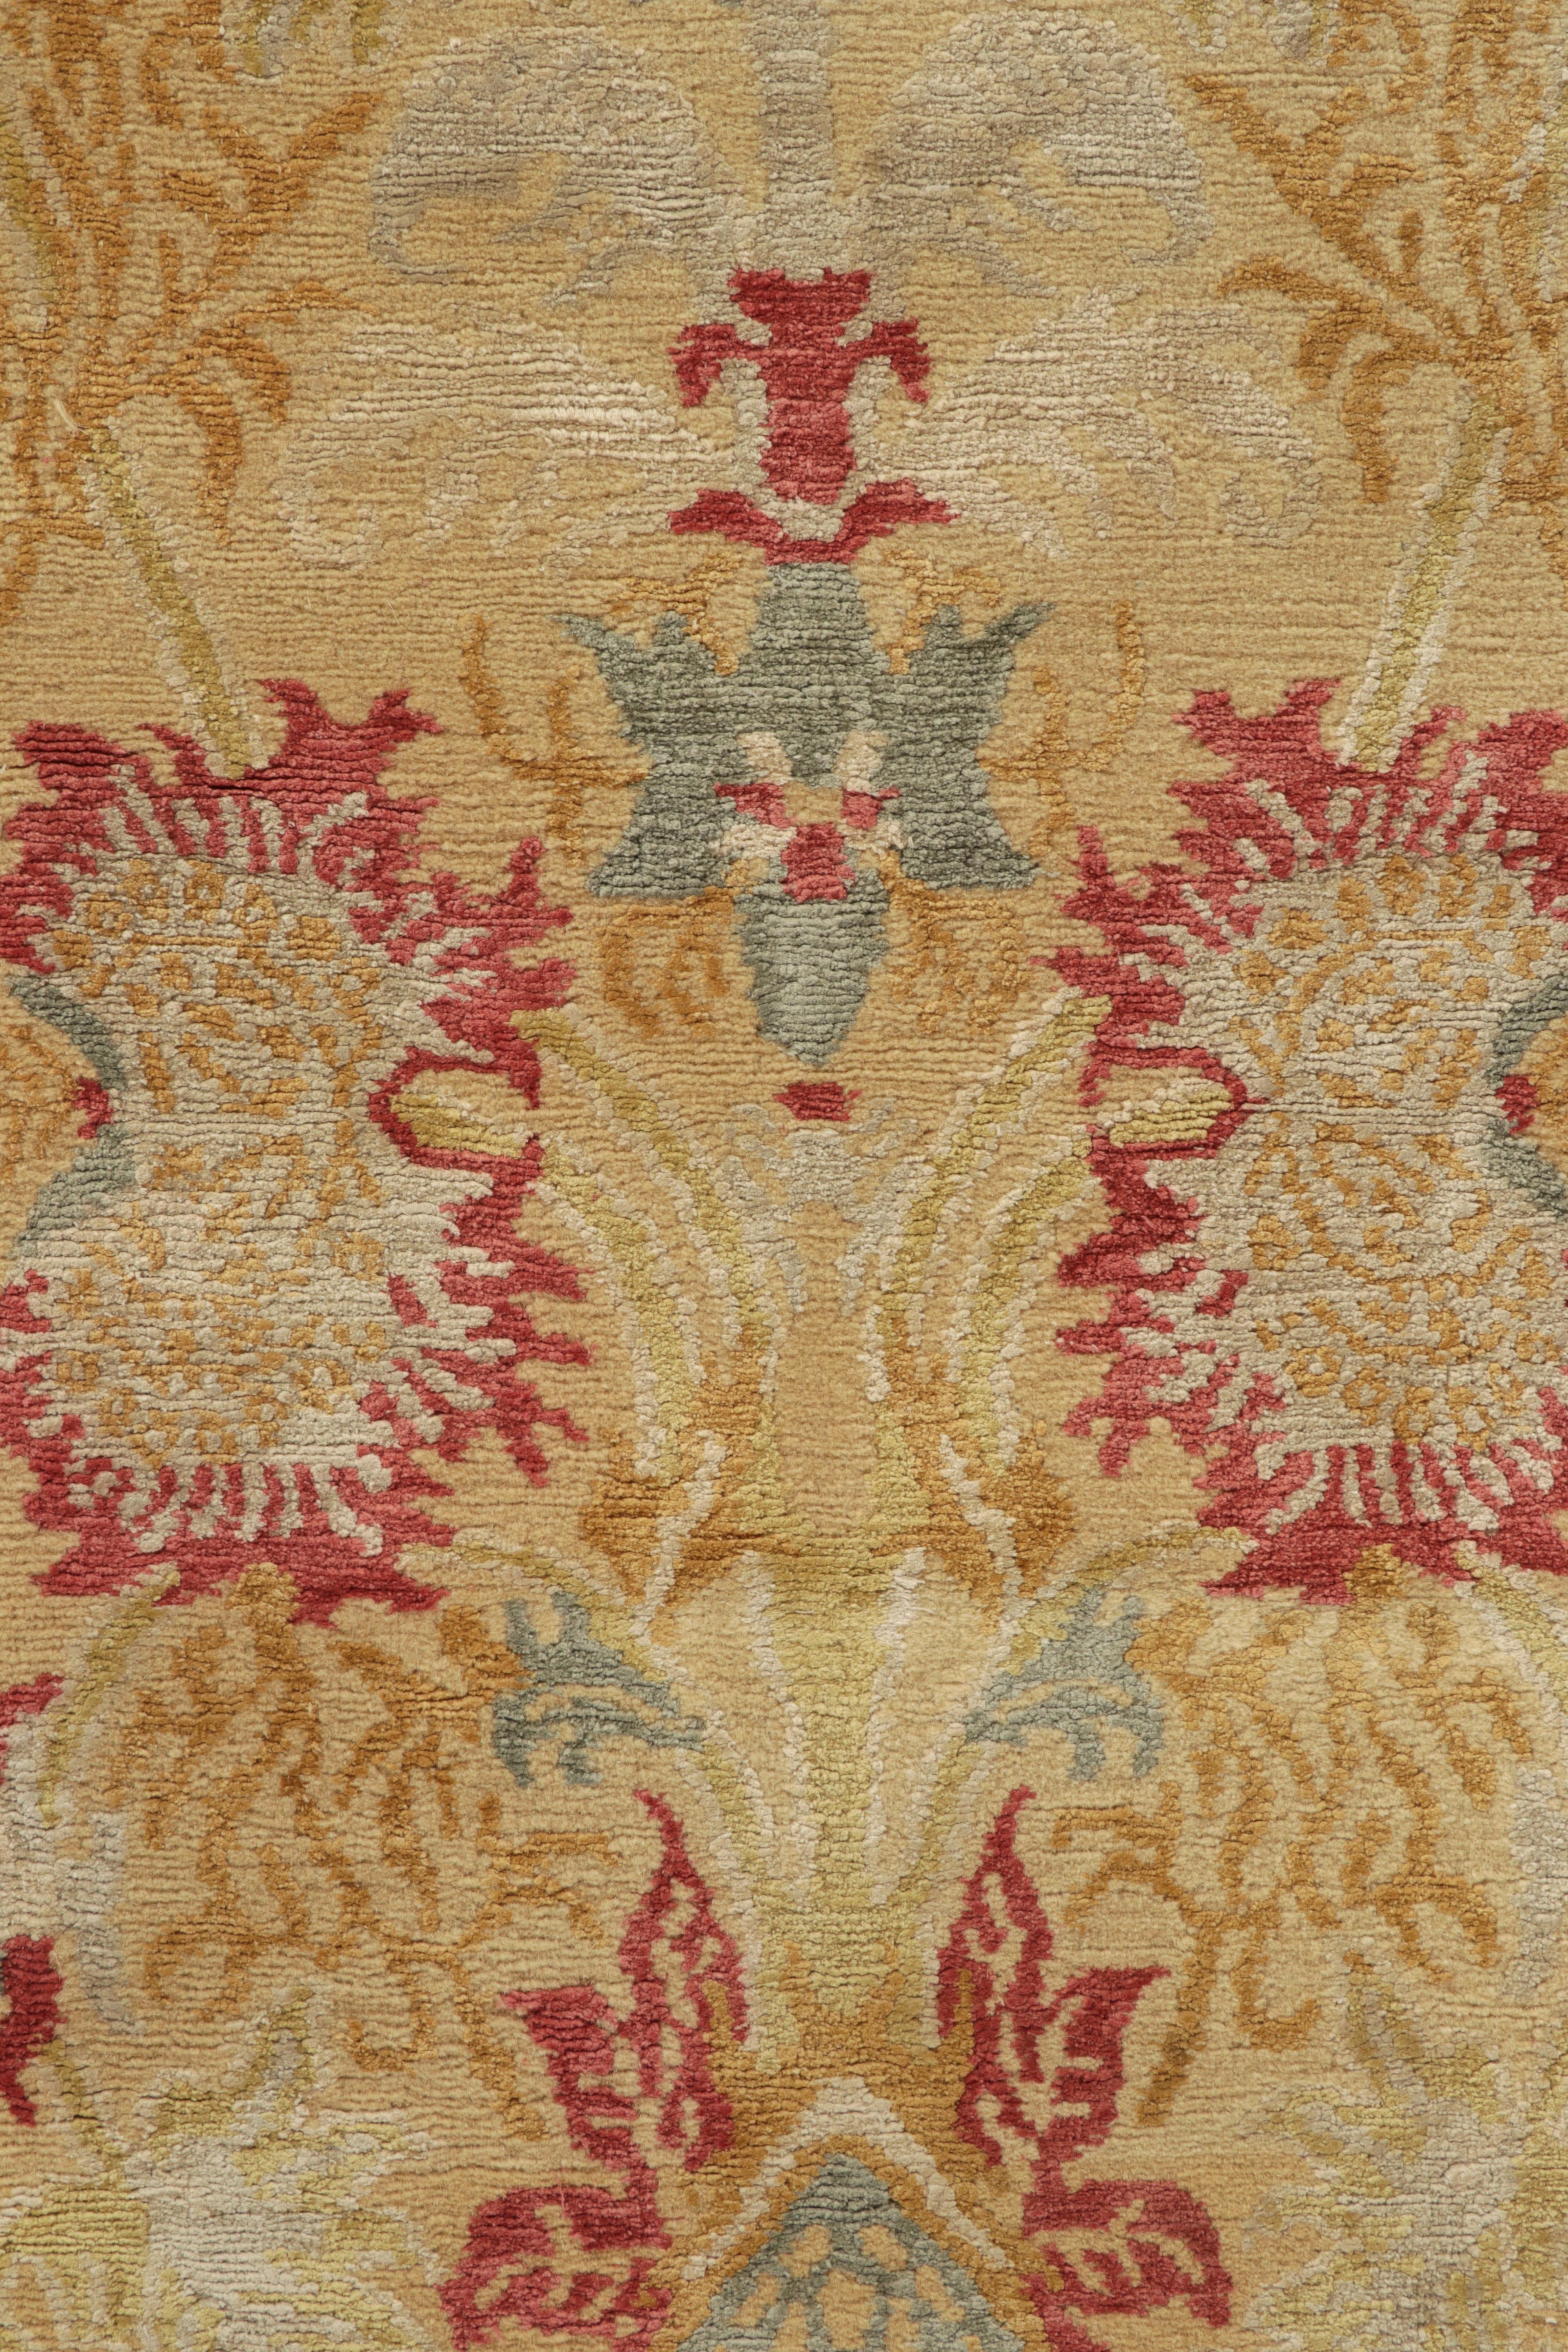 Rug & Kilim's Spanish European Style Runner in Gold, Red & Blue Floral Pattern In New Condition For Sale In Long Island City, NY